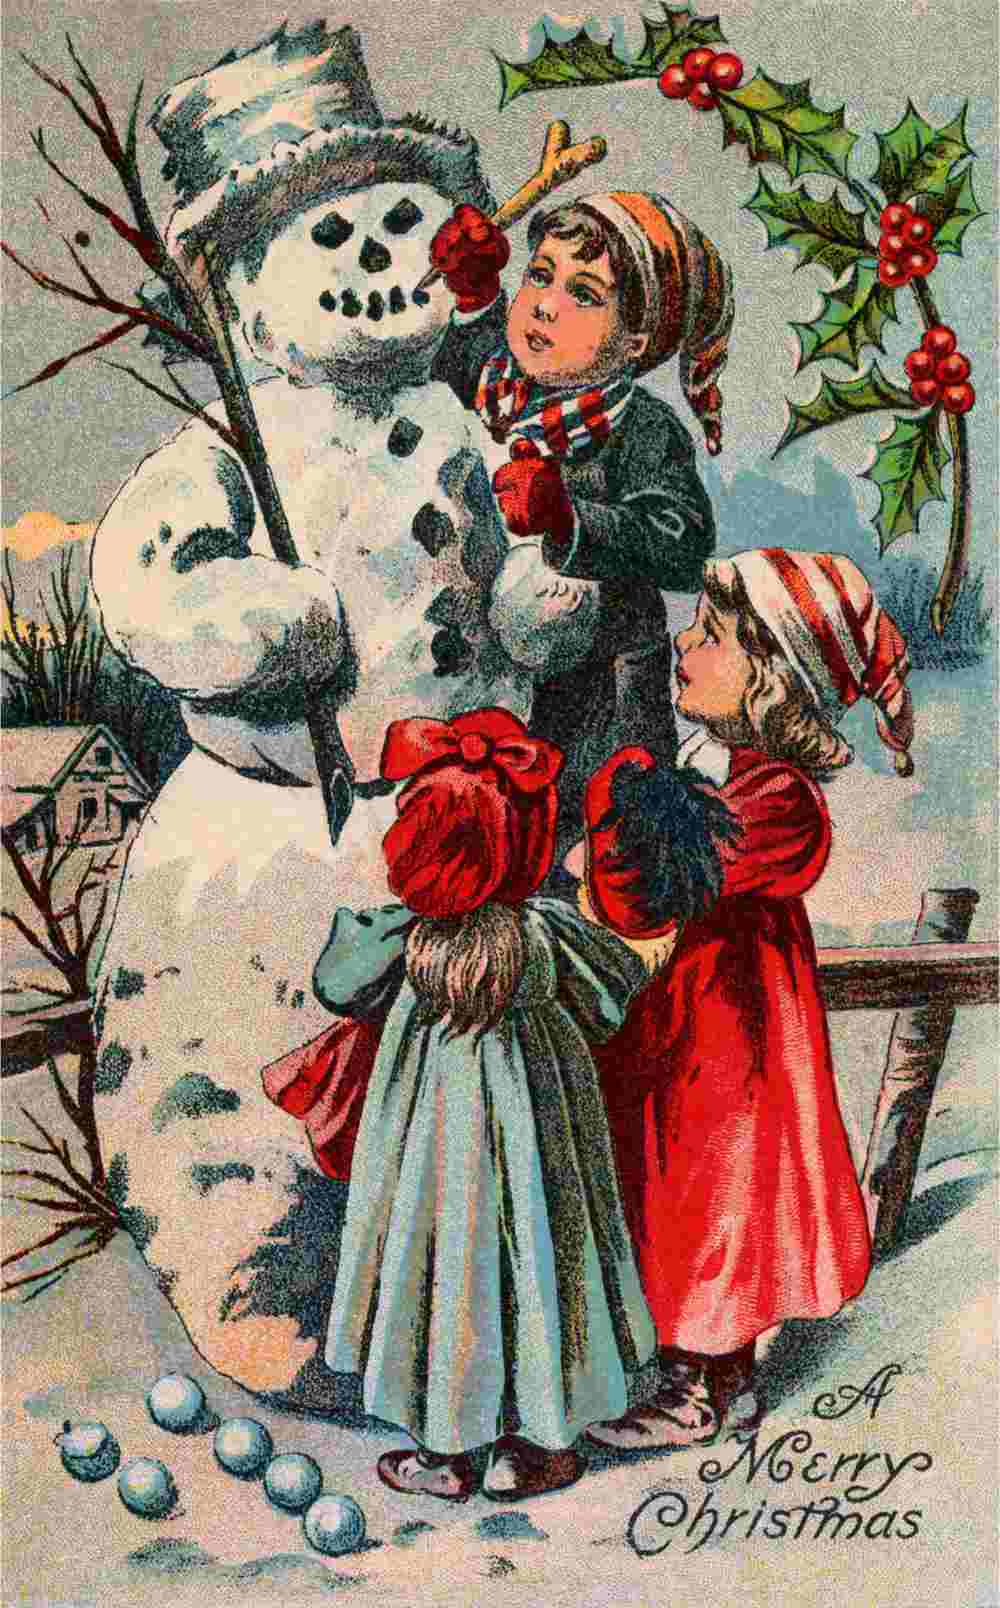 A vintage Christmas card design with three children next to a snowman with a silver hat.